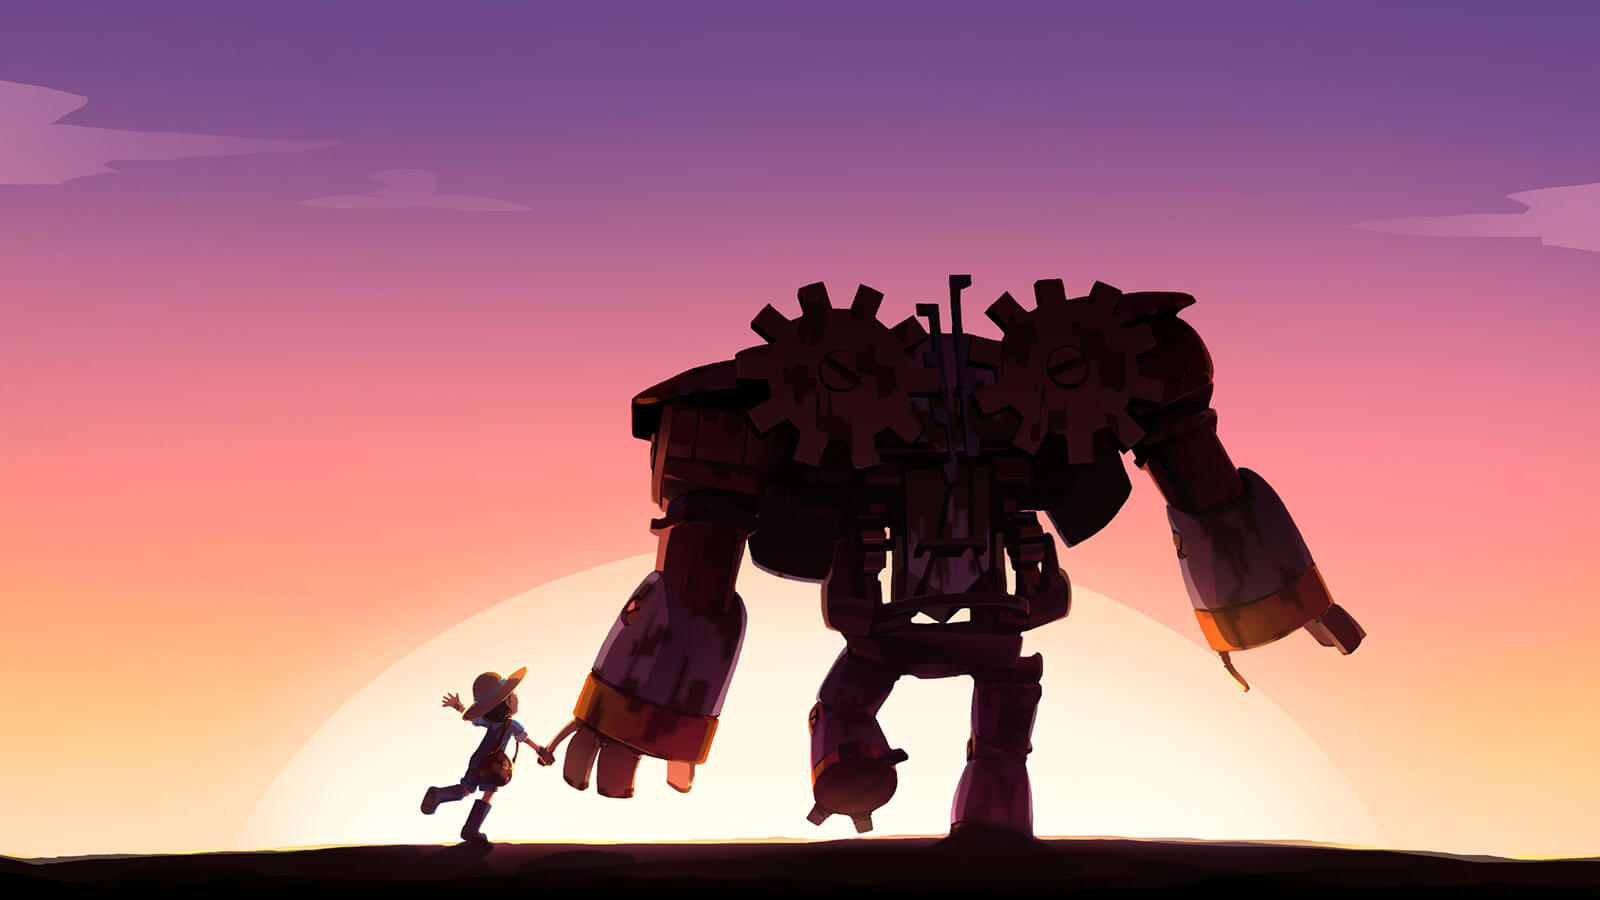 Girl and giant robot walk hand-in-hand toward the sunset